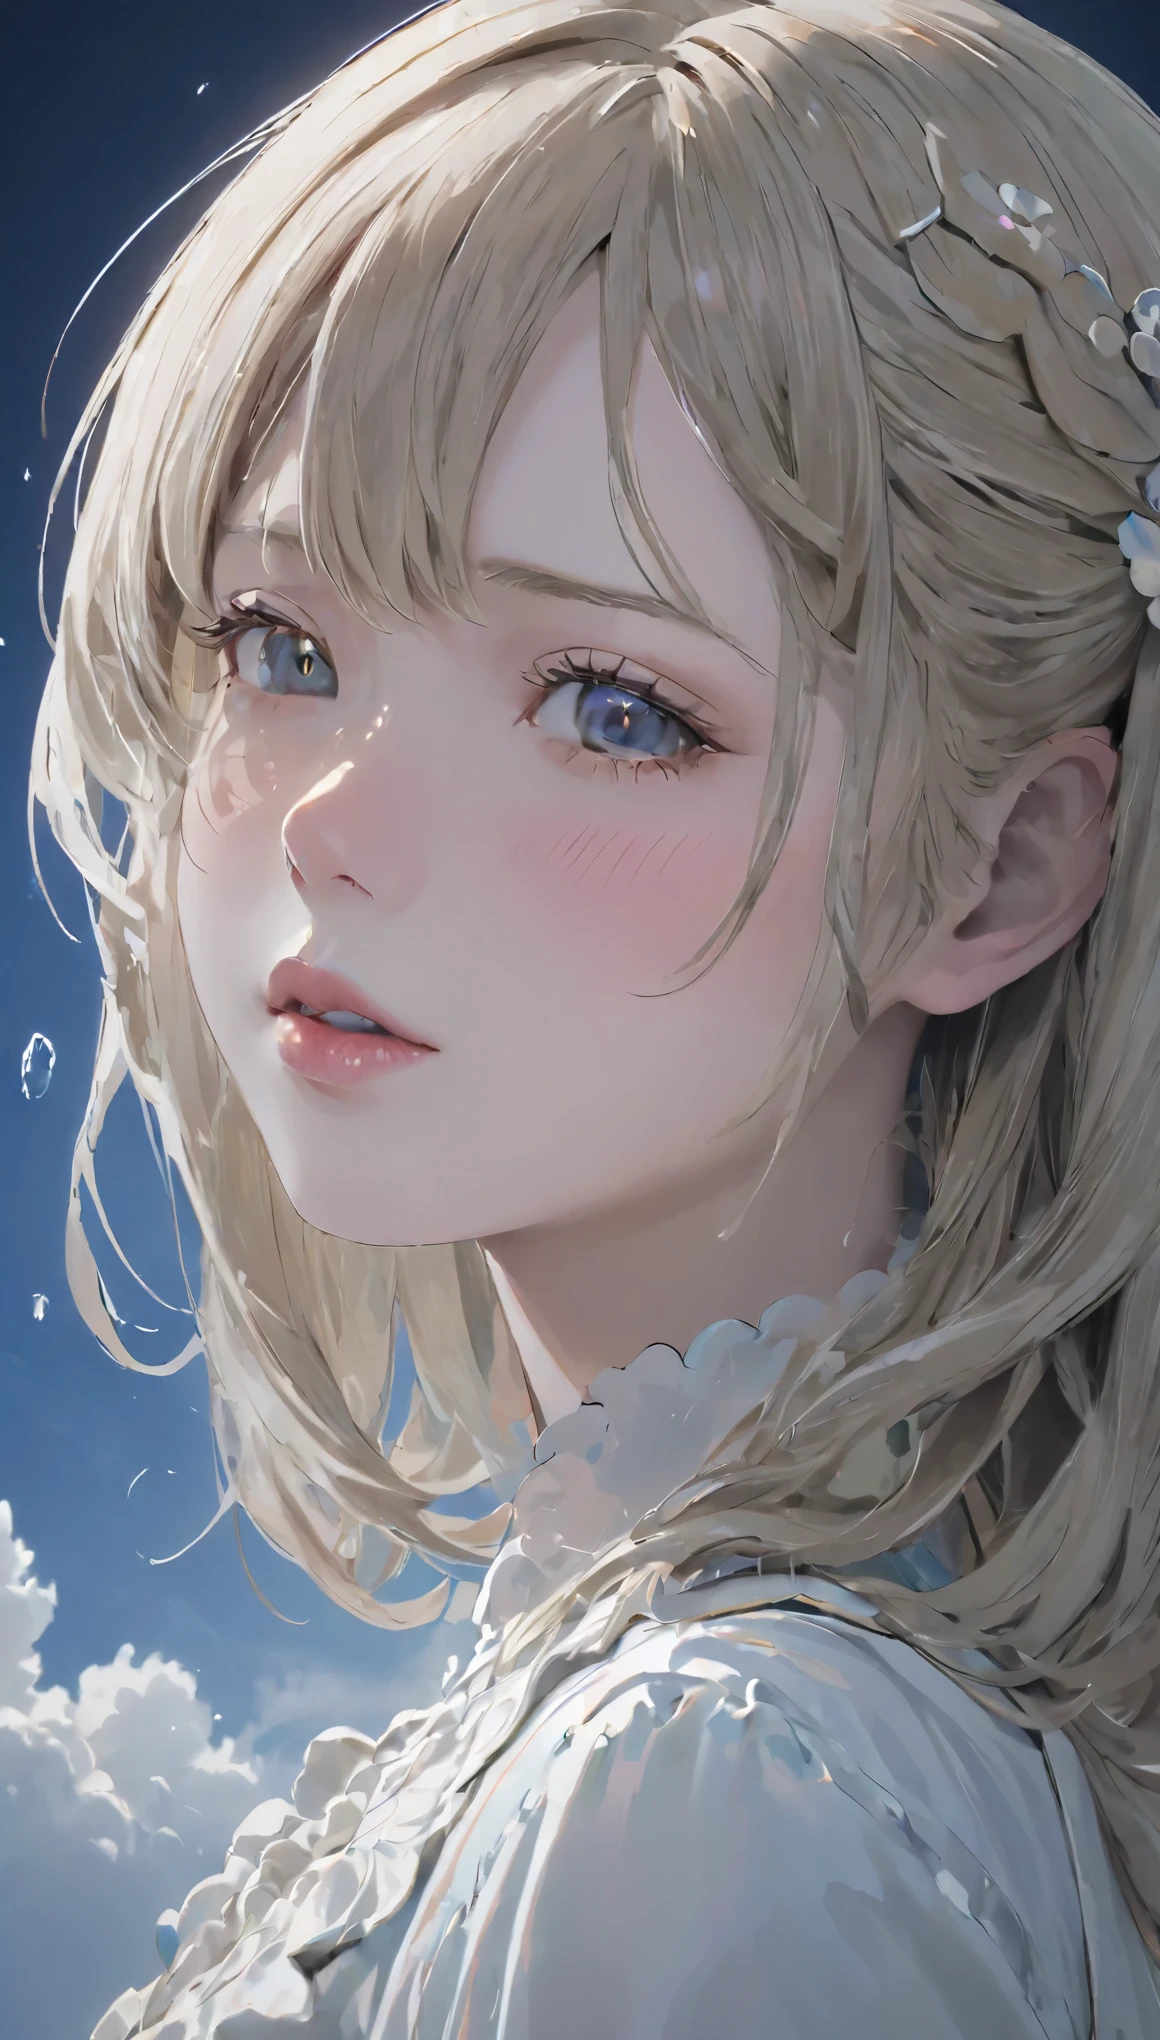 UHigh resolution, retina, masterpiece, Accurate, Anatomically correct, Textured skin, Very detailed, Attention to detail, high quality, 最high quality, High resolution, 1080p, High resolution, 4K, 8k, 16k), (Beautiful details, Beautiful lip detail, Very detailedな目と顔),最high quality,Tabletop,solo,solo,With a girl,Cumulonimbus、Beautiful profile